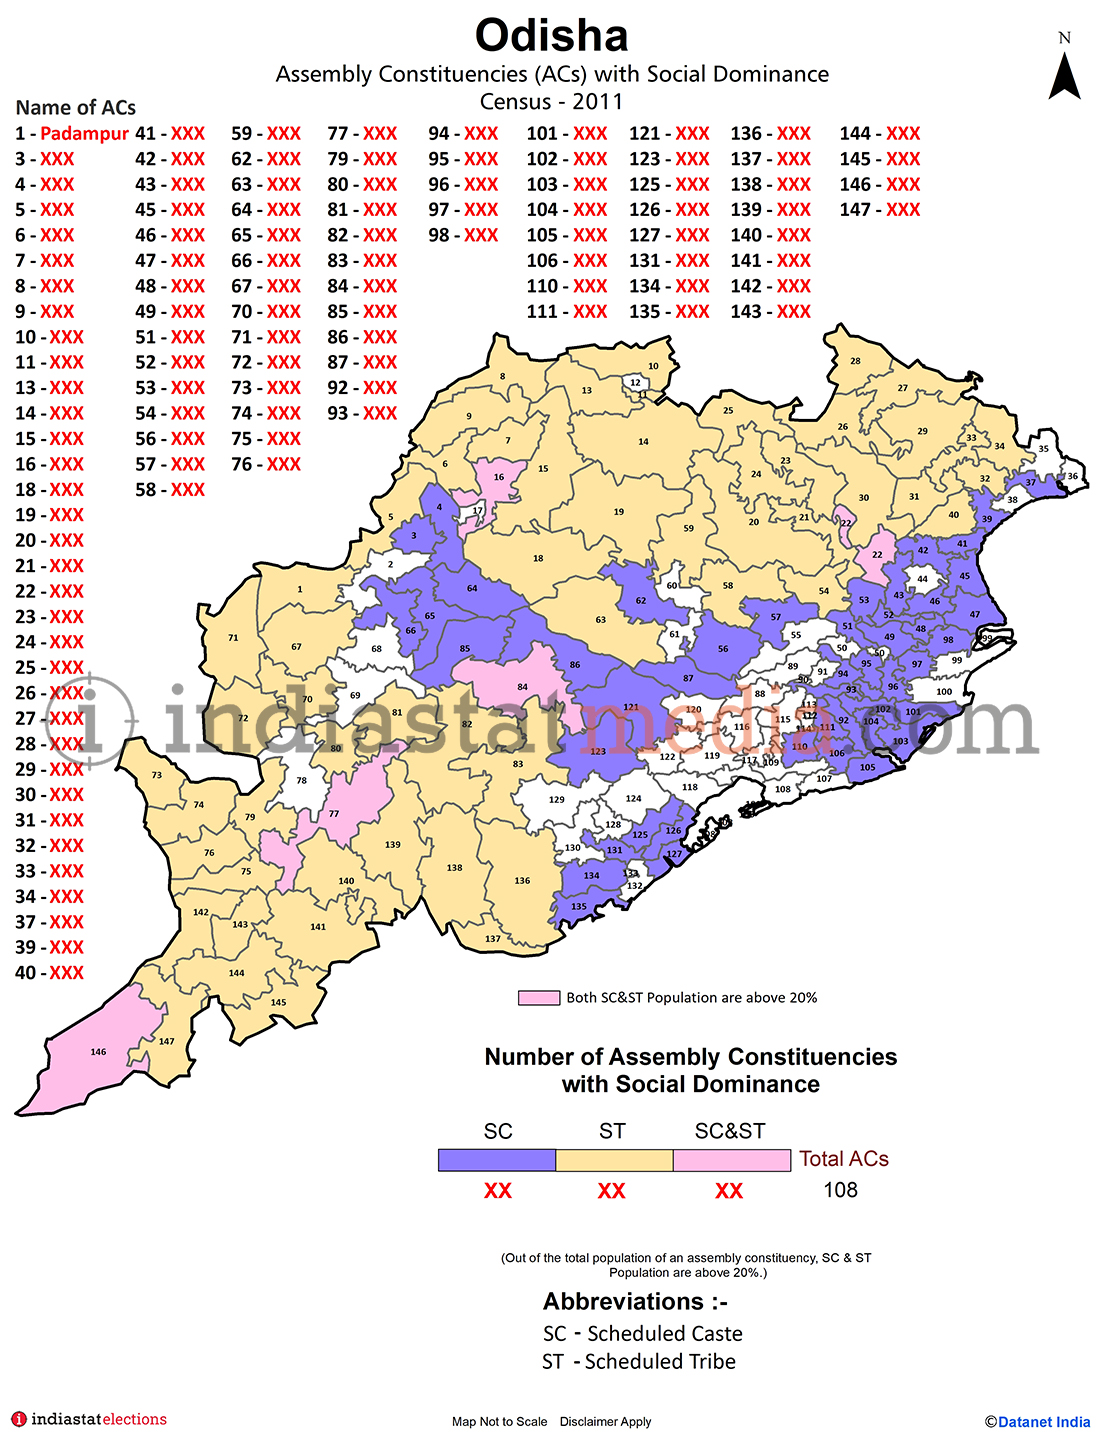 Assembly Constituencies with Social Dominance in Odisha - Census 2011